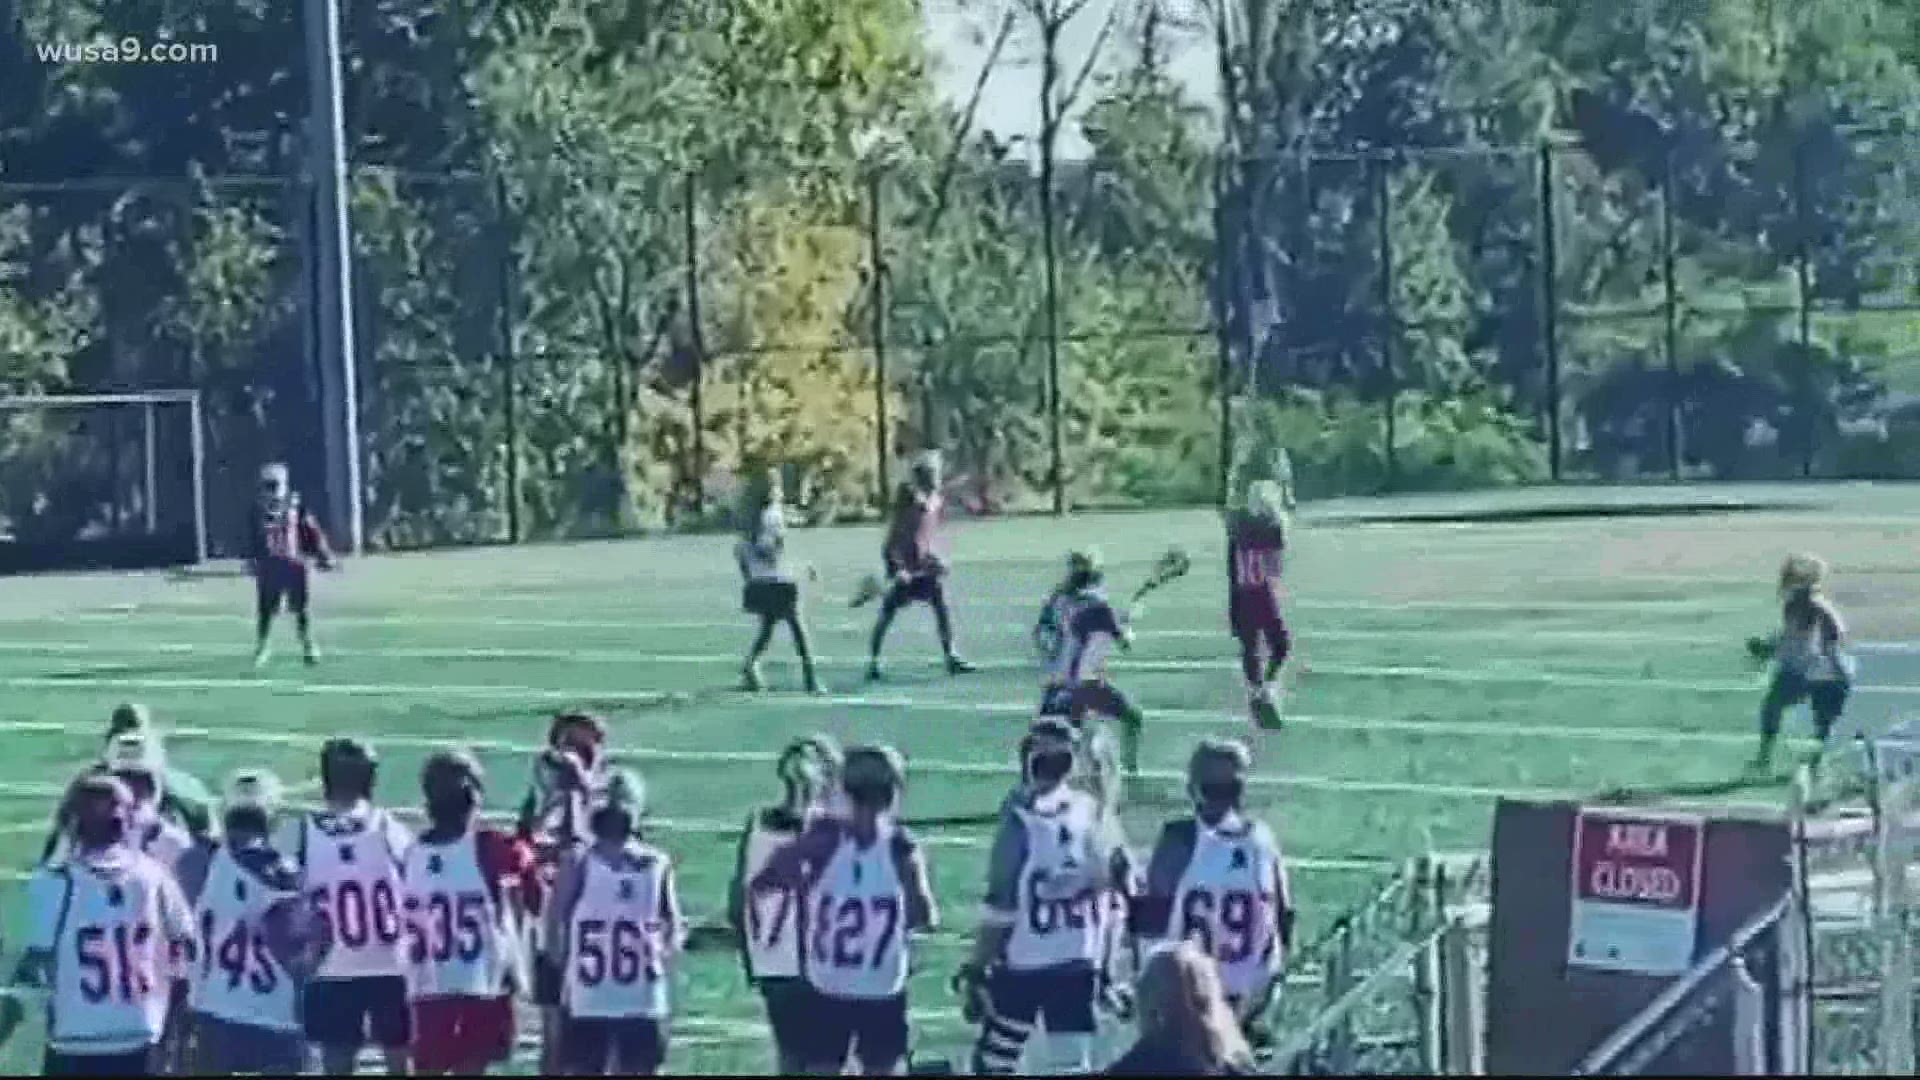 A mother says her son was called a racial slur during a recent lacrosse game. She says this isn't the first time it has happened